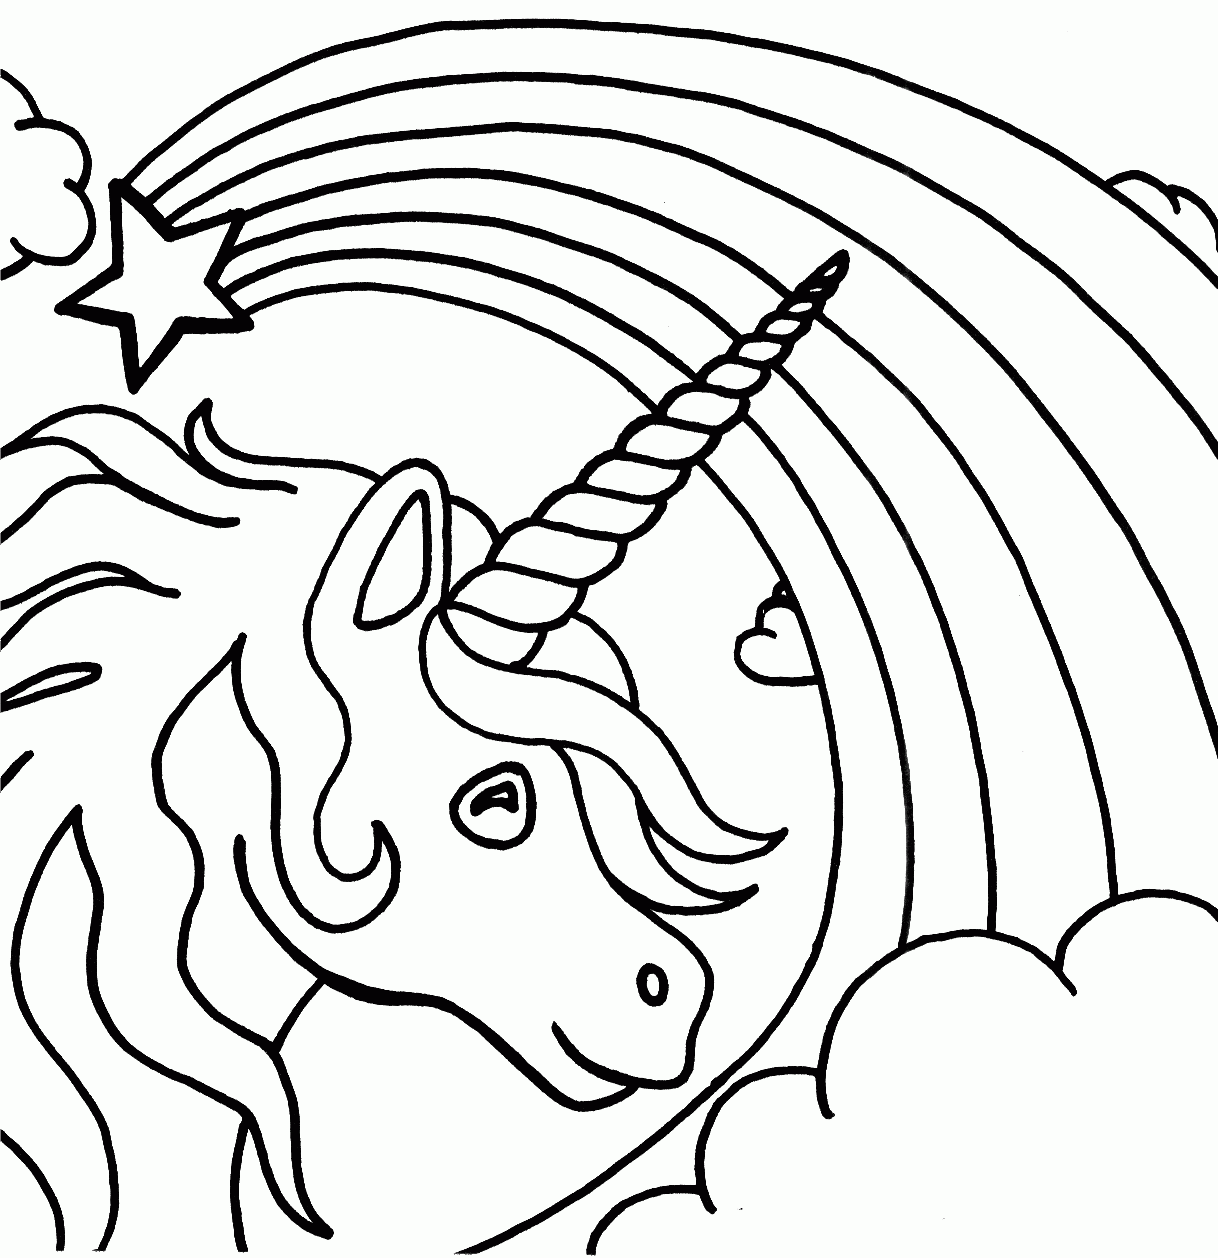 Rainbow S - Coloring Pages for Kids and for Adults